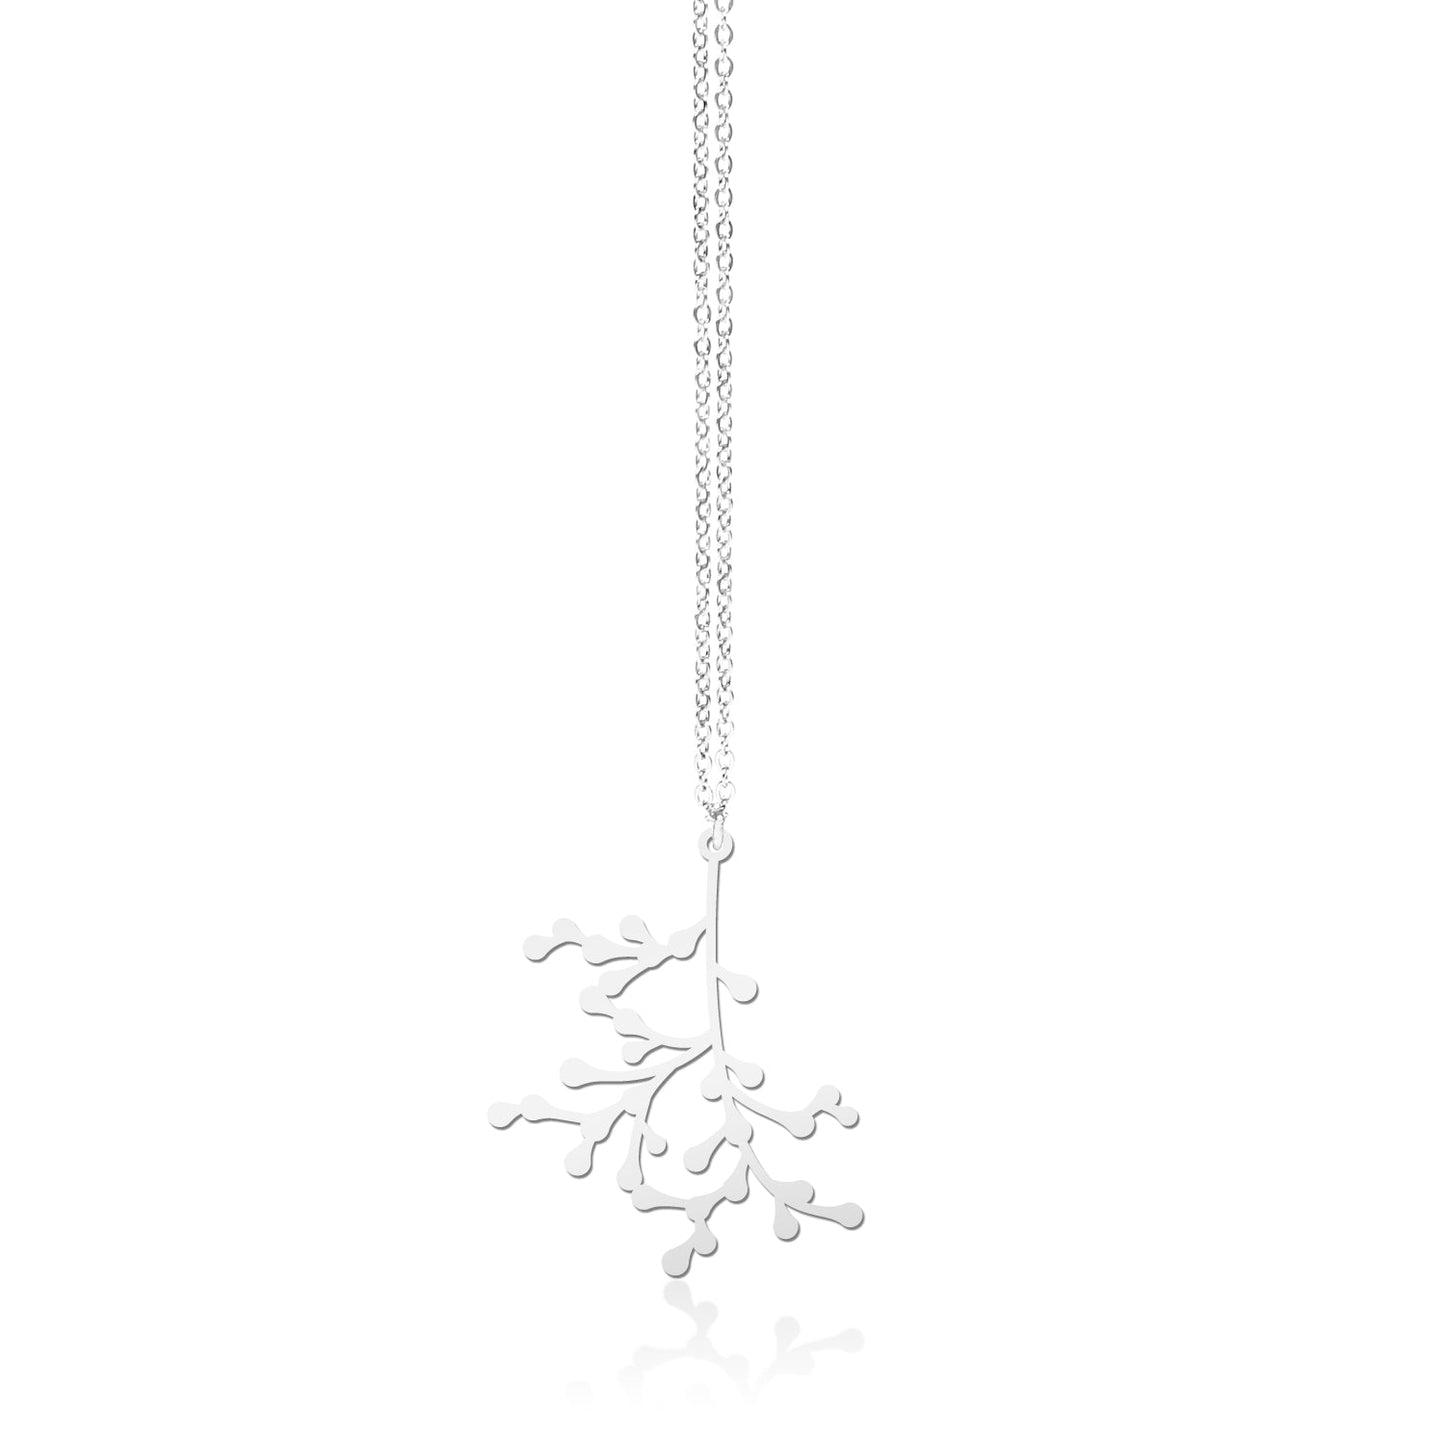 SEEDED EUCALYPTUS PENDANT SMALL SILVER WITH CHAIN